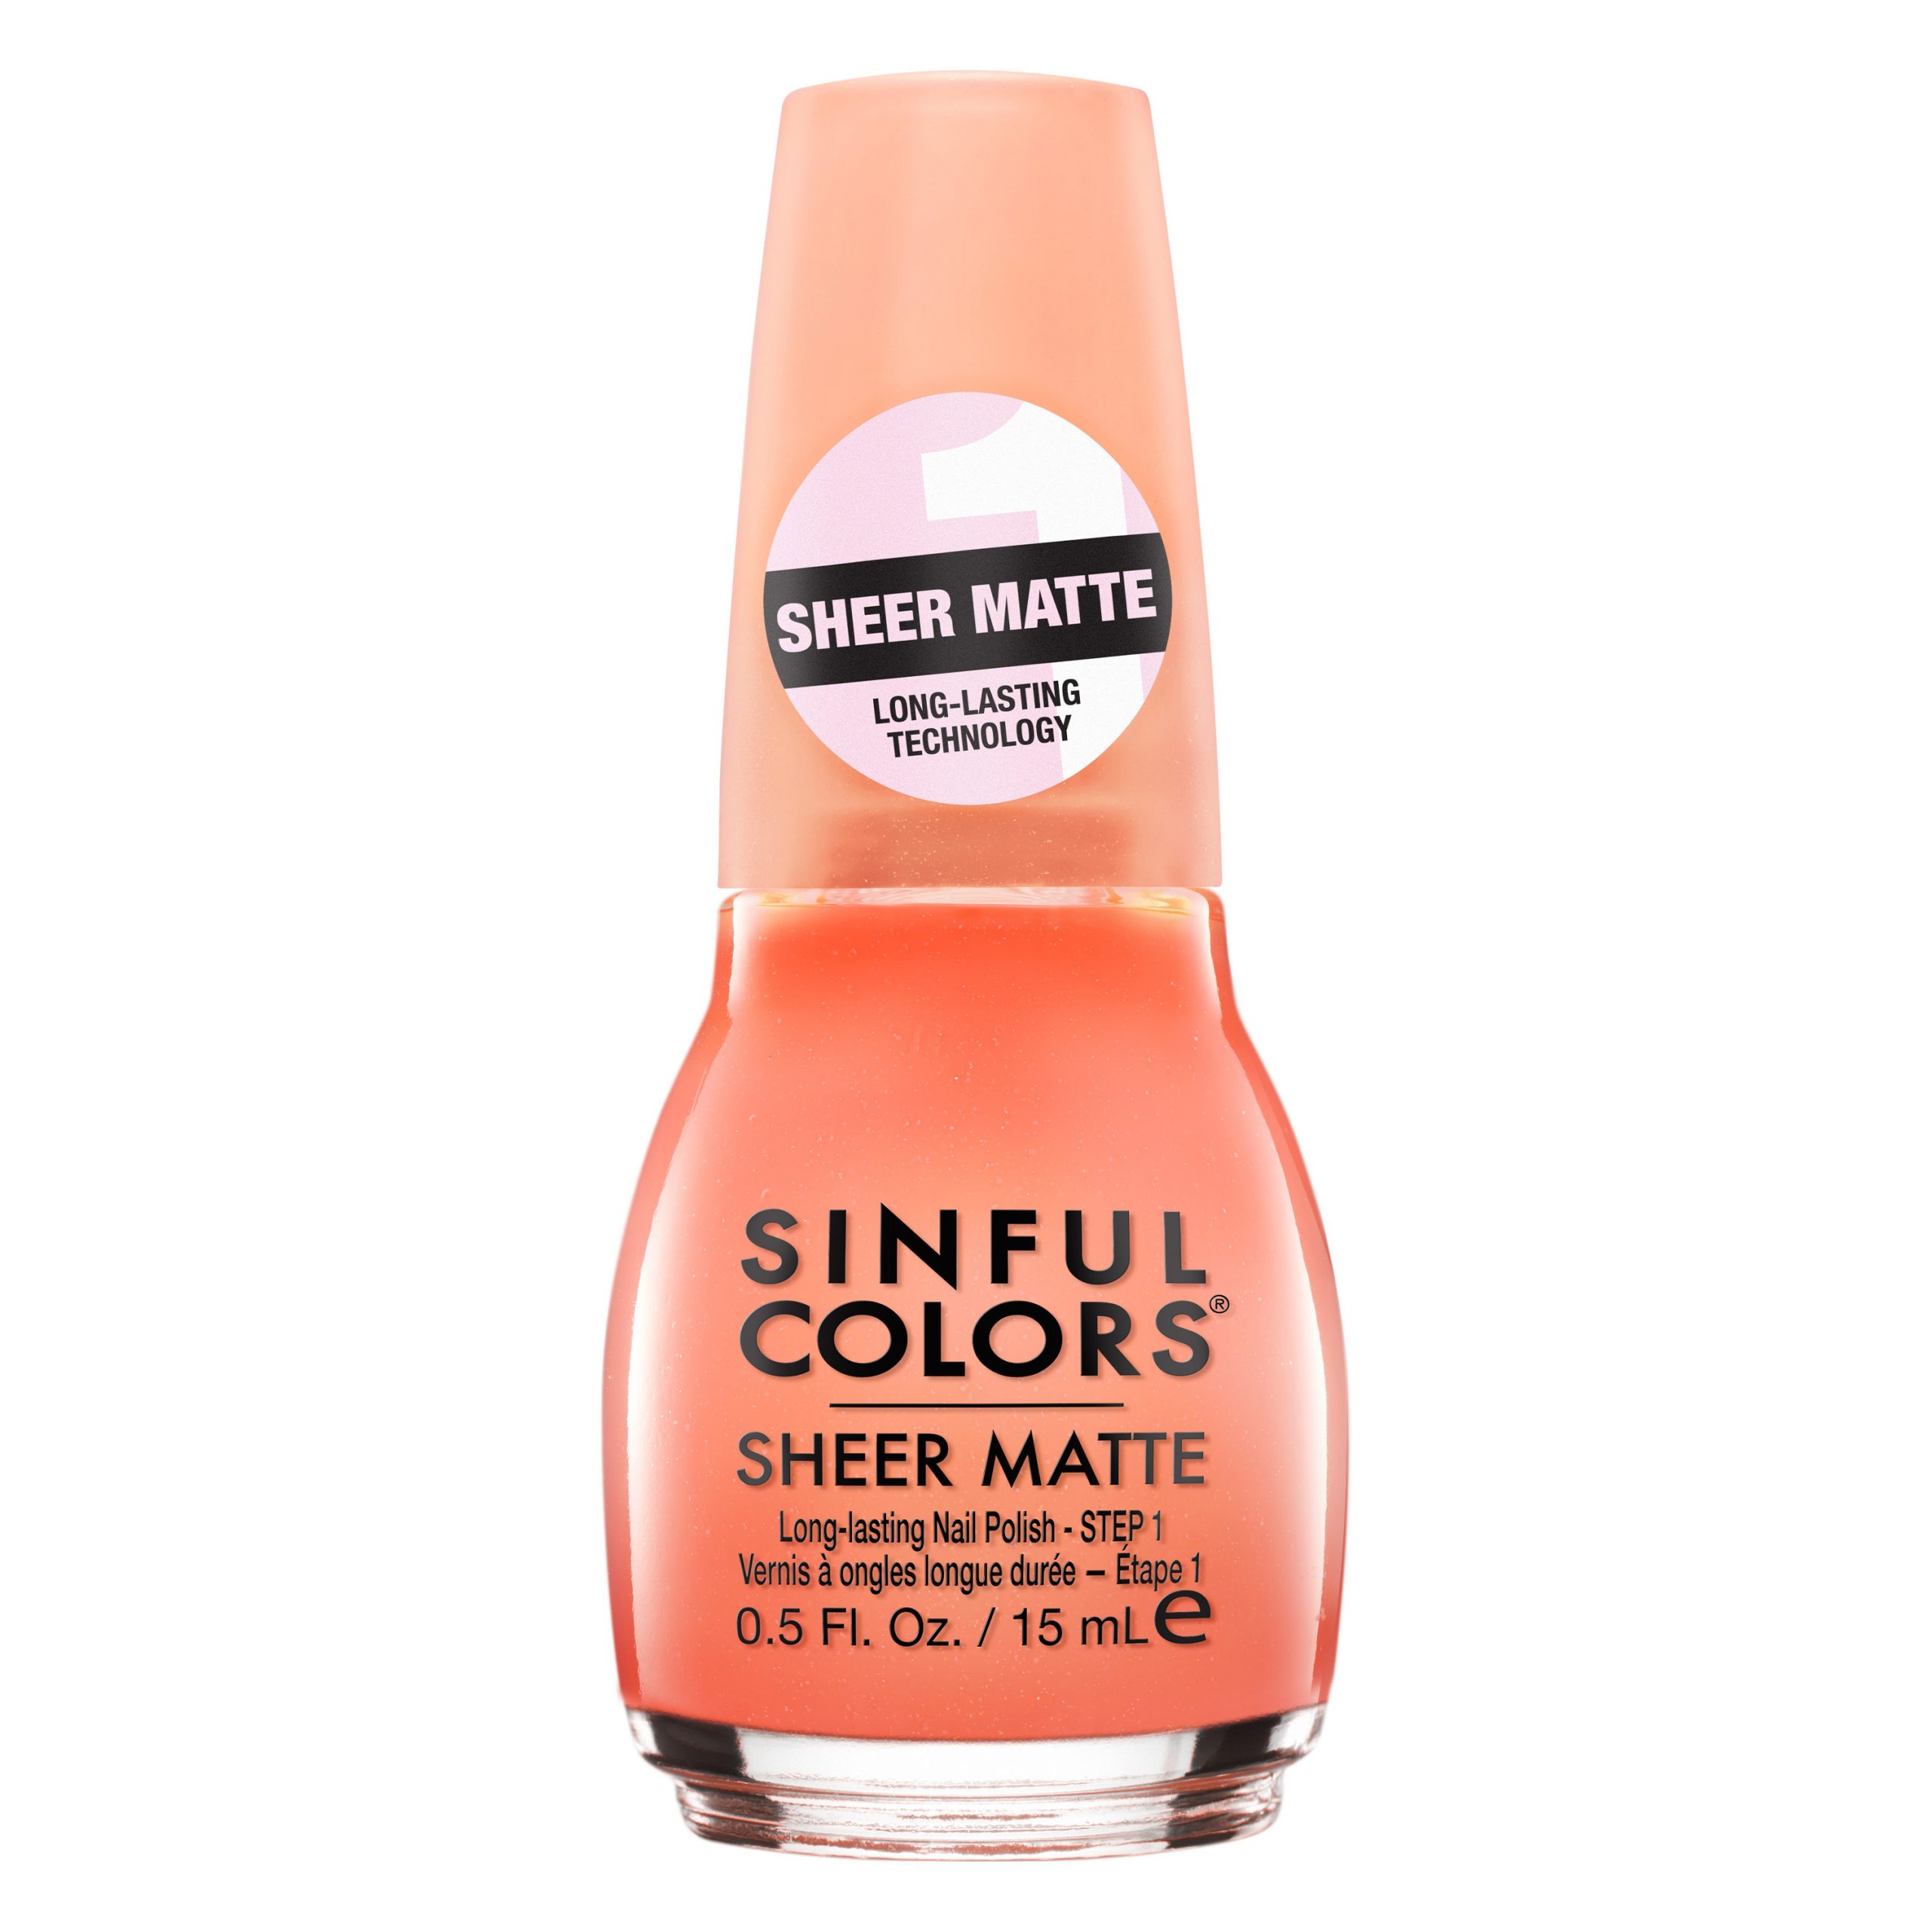 Buy Bari Revlon 6352-71 .5 Oz Let Me Go Professional Nail Polish by Sinful  Colors Online at Low Prices in India - Amazon.in